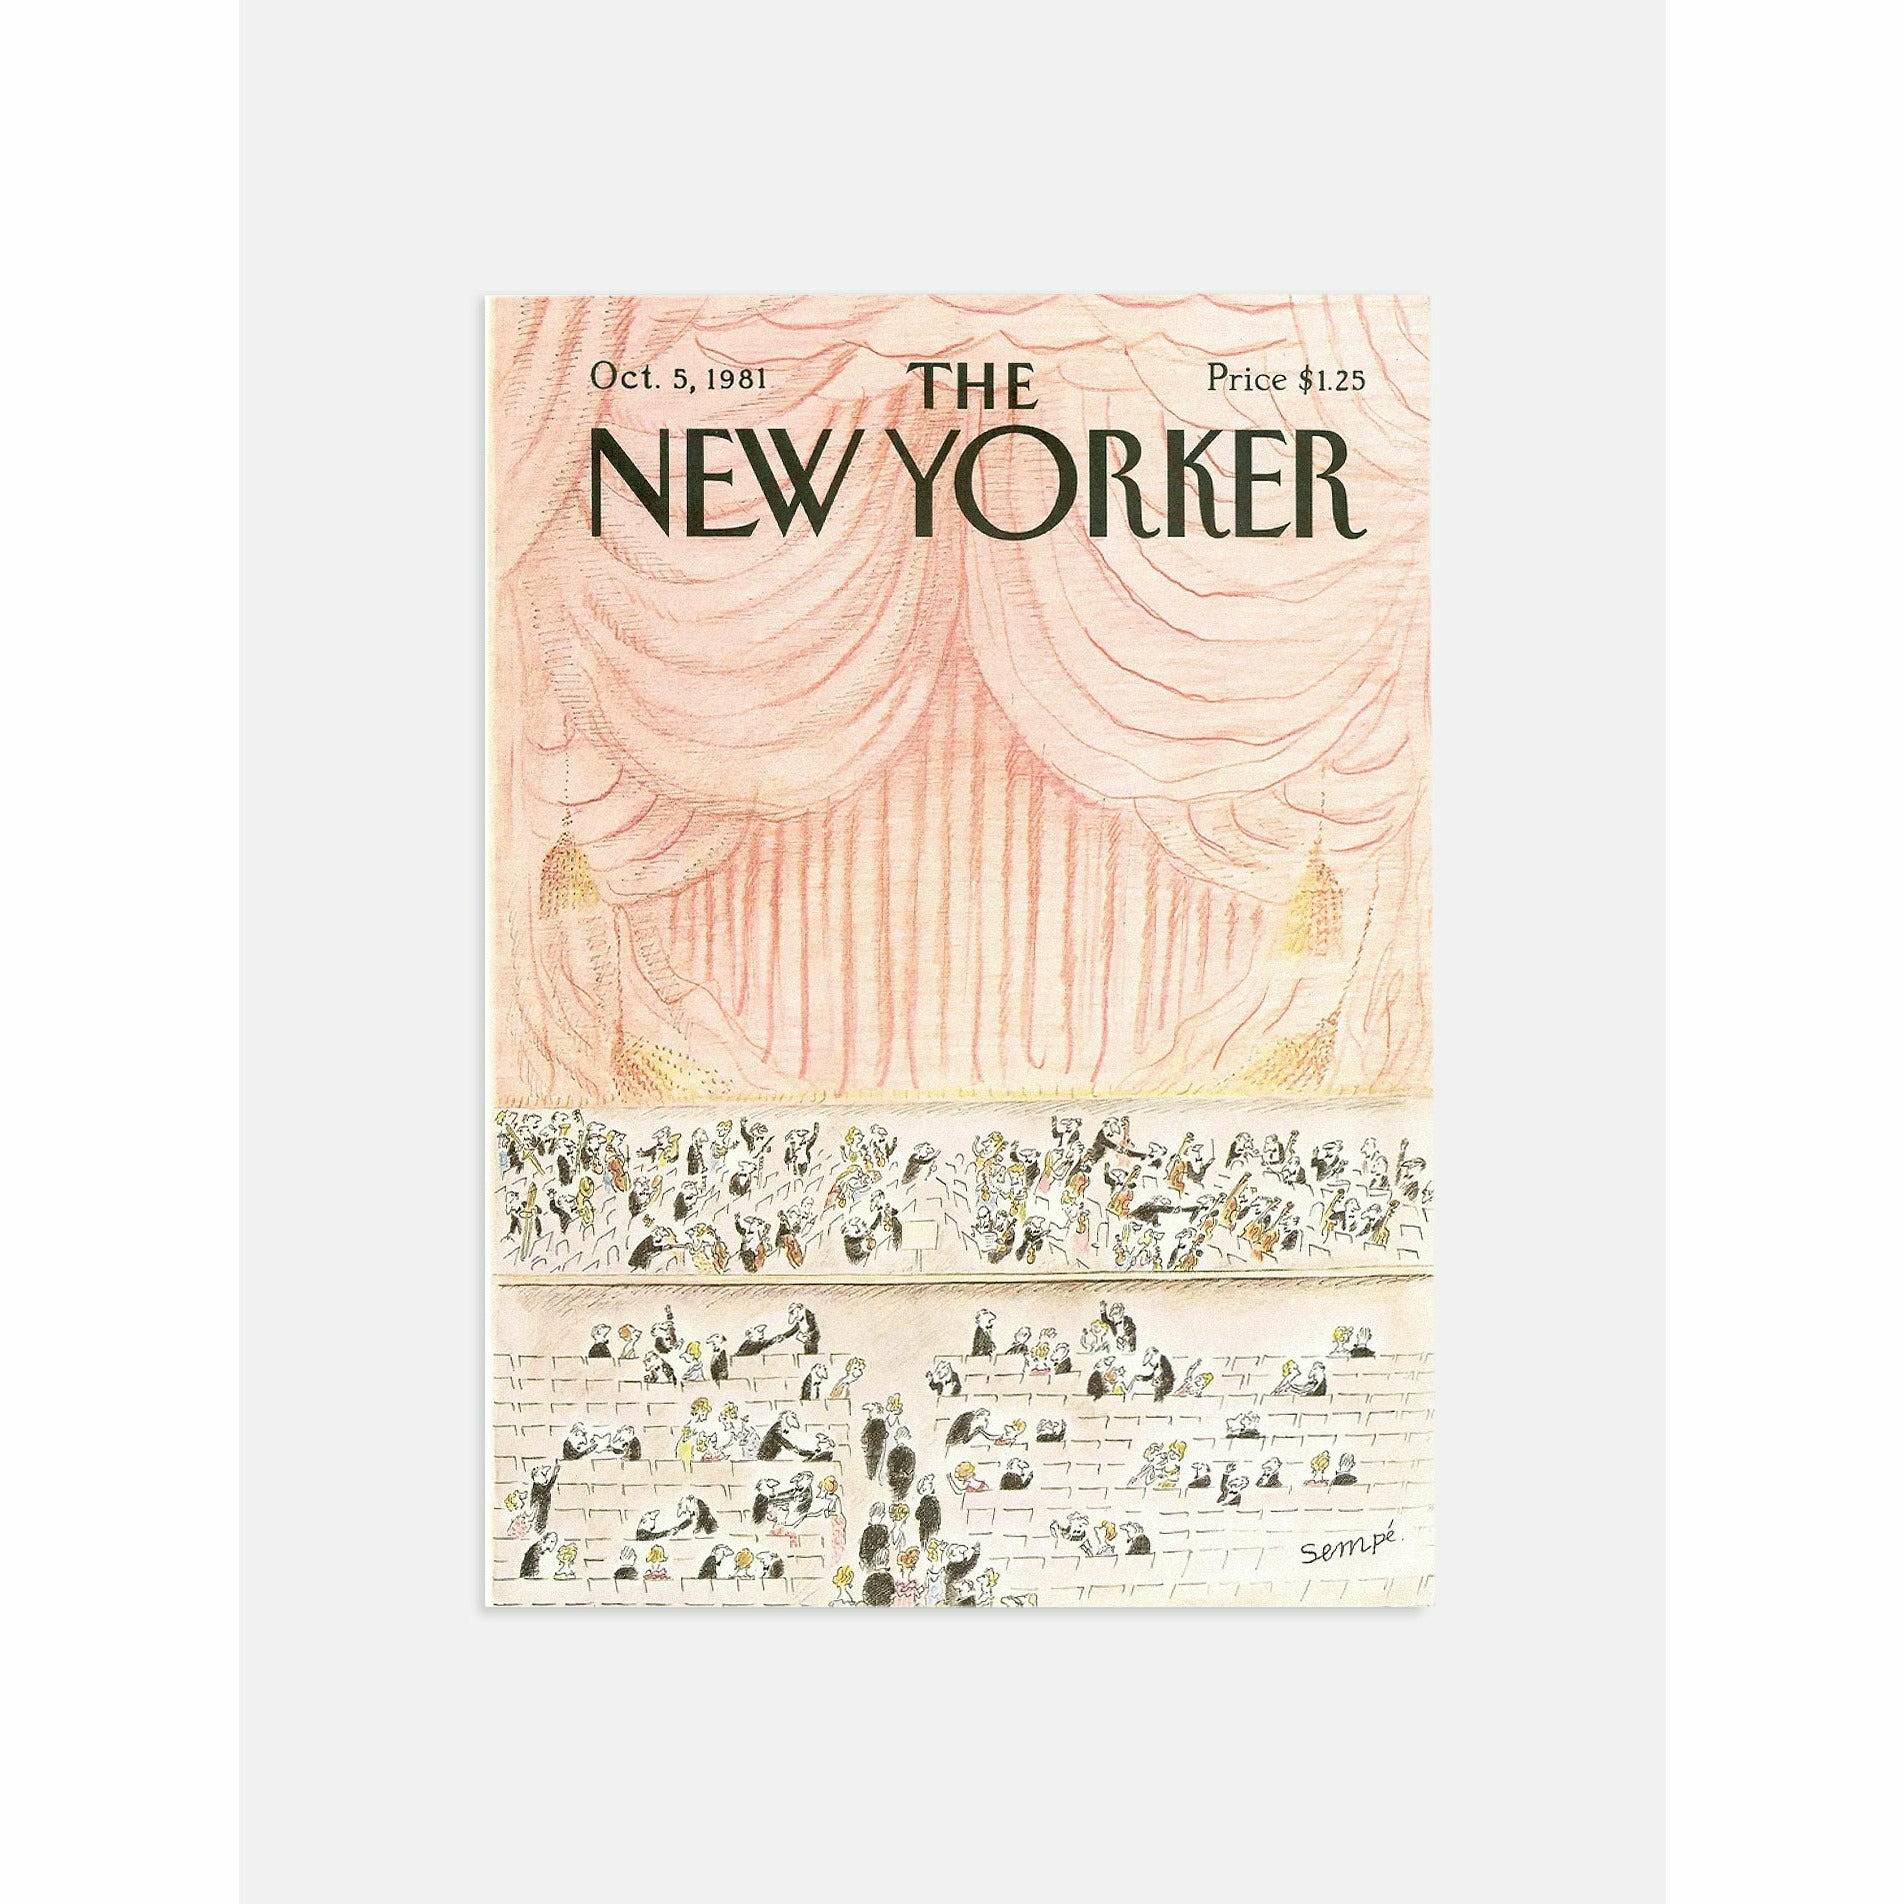 The New Yorker Oct 5, 1981 